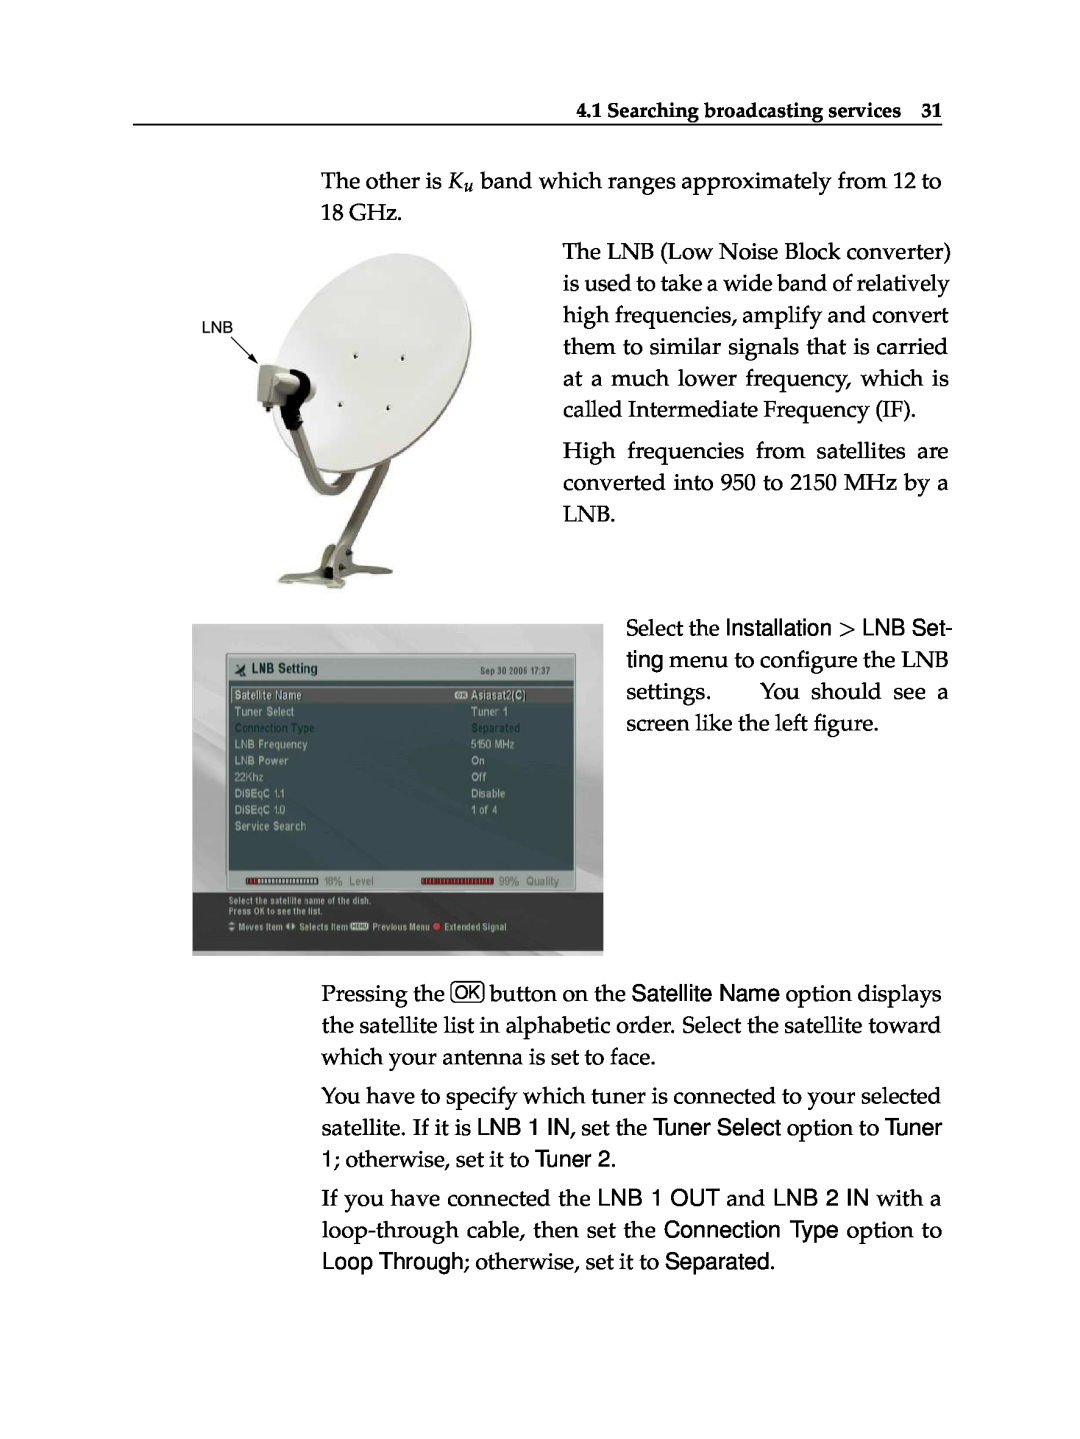 Topfield TF 6000 PVR ES manual The other is Ku band which ranges approximately from 12 to 18 GHz 